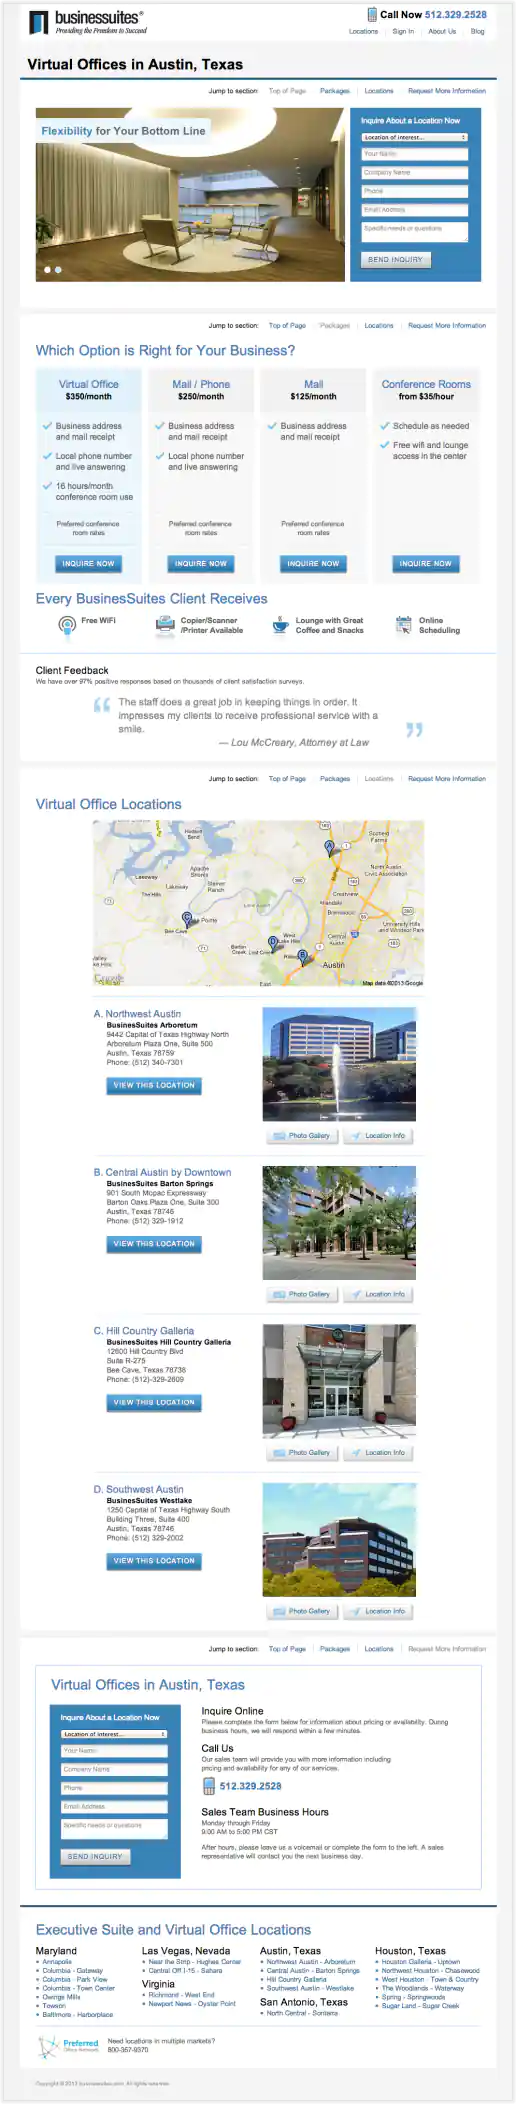 Virtual Offices Page - version 1 project image